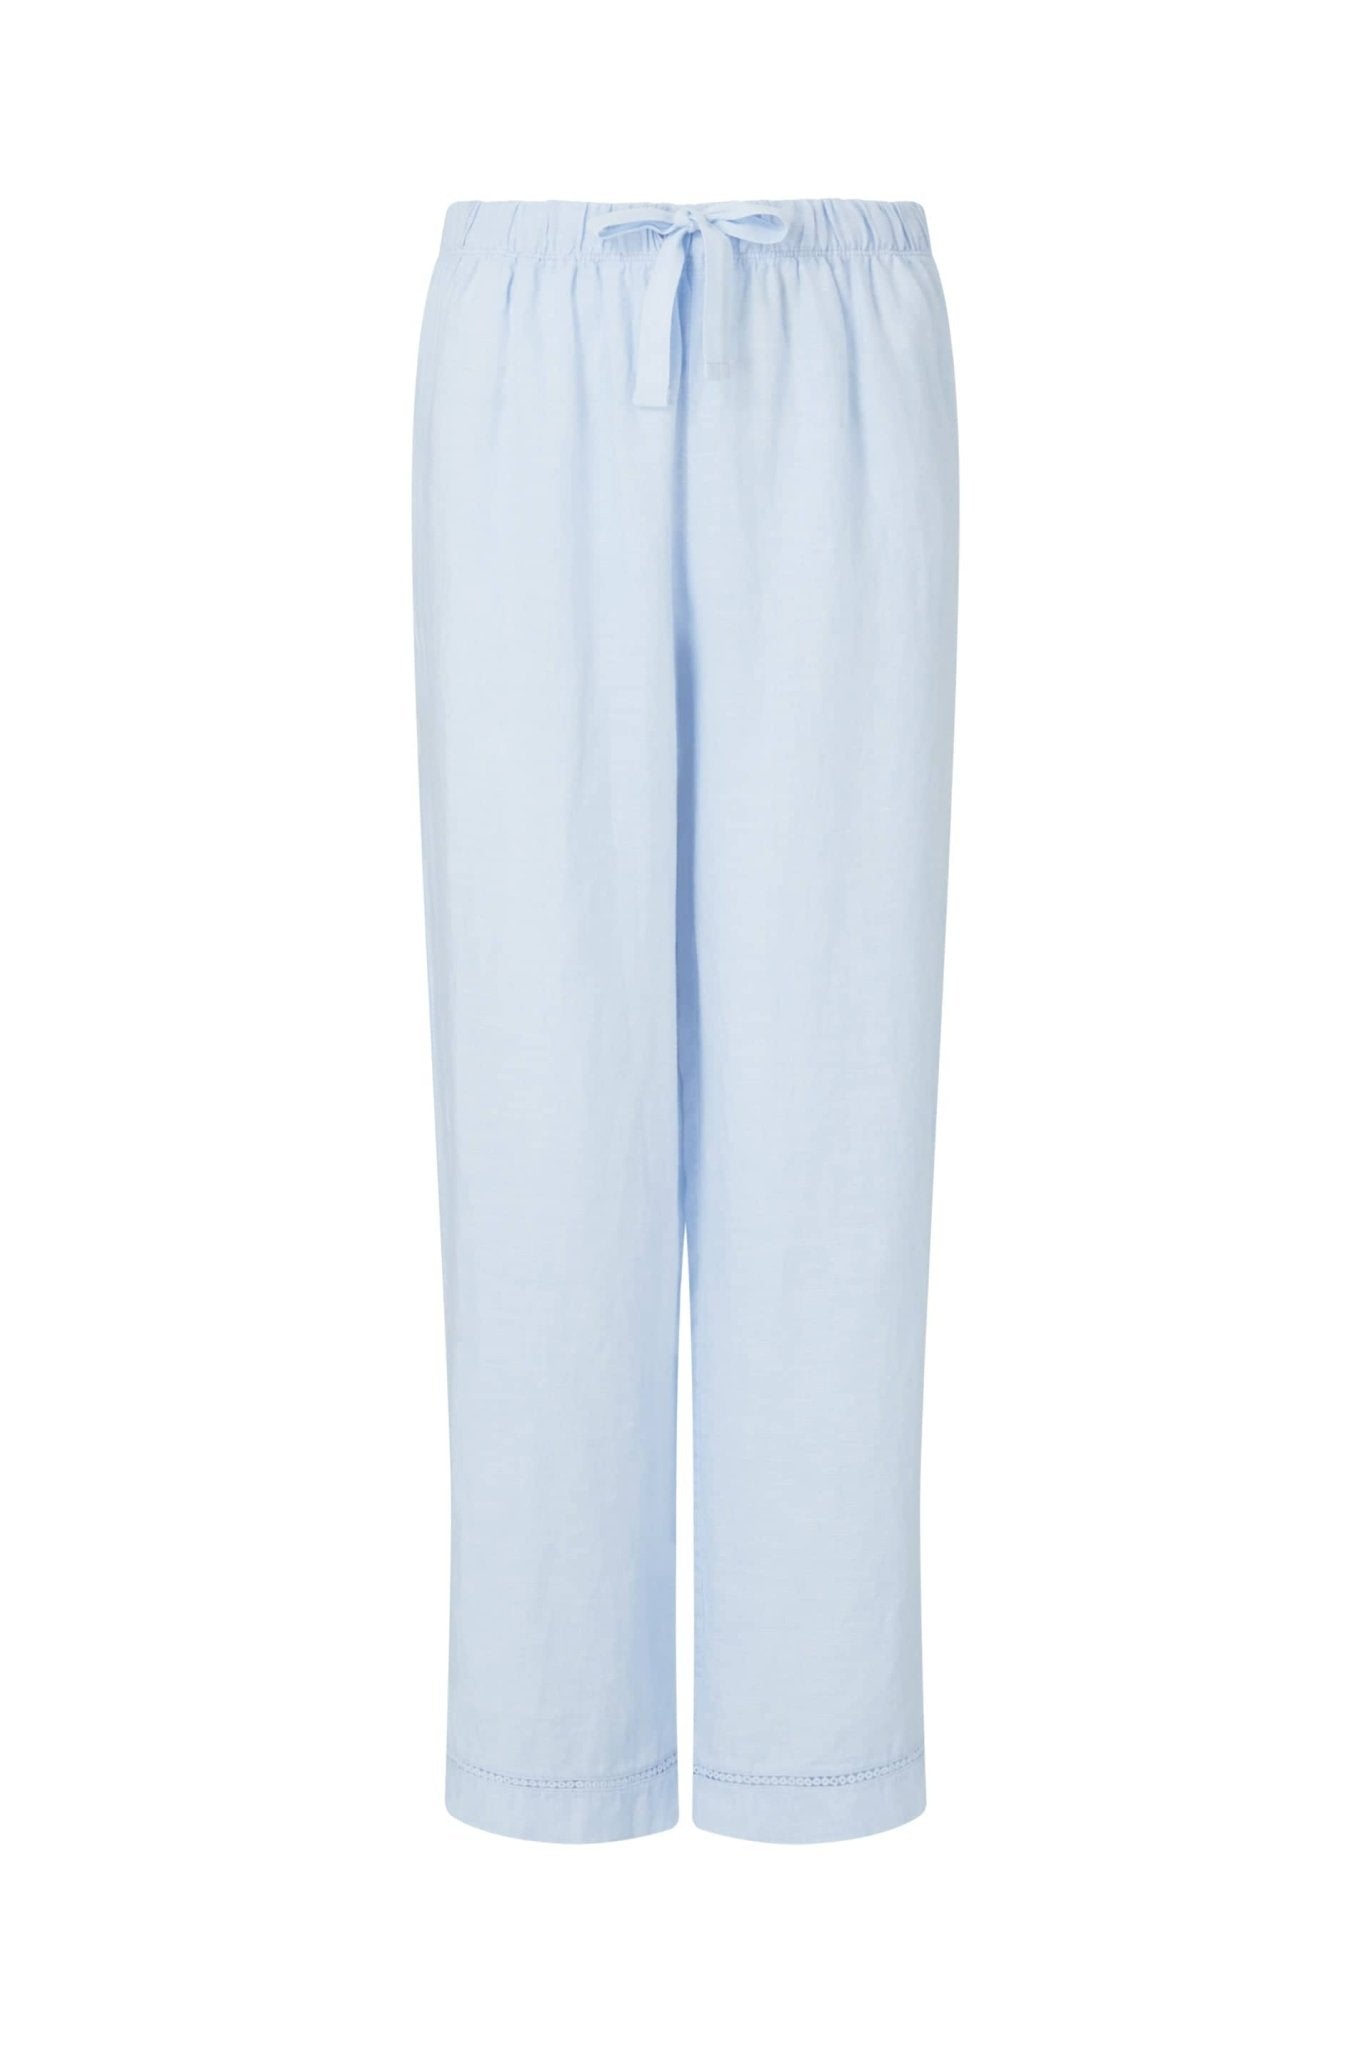 Harlyn Bay Long Sleeve Top and Trousers Set in Blue - Heidi Klein - UK Store